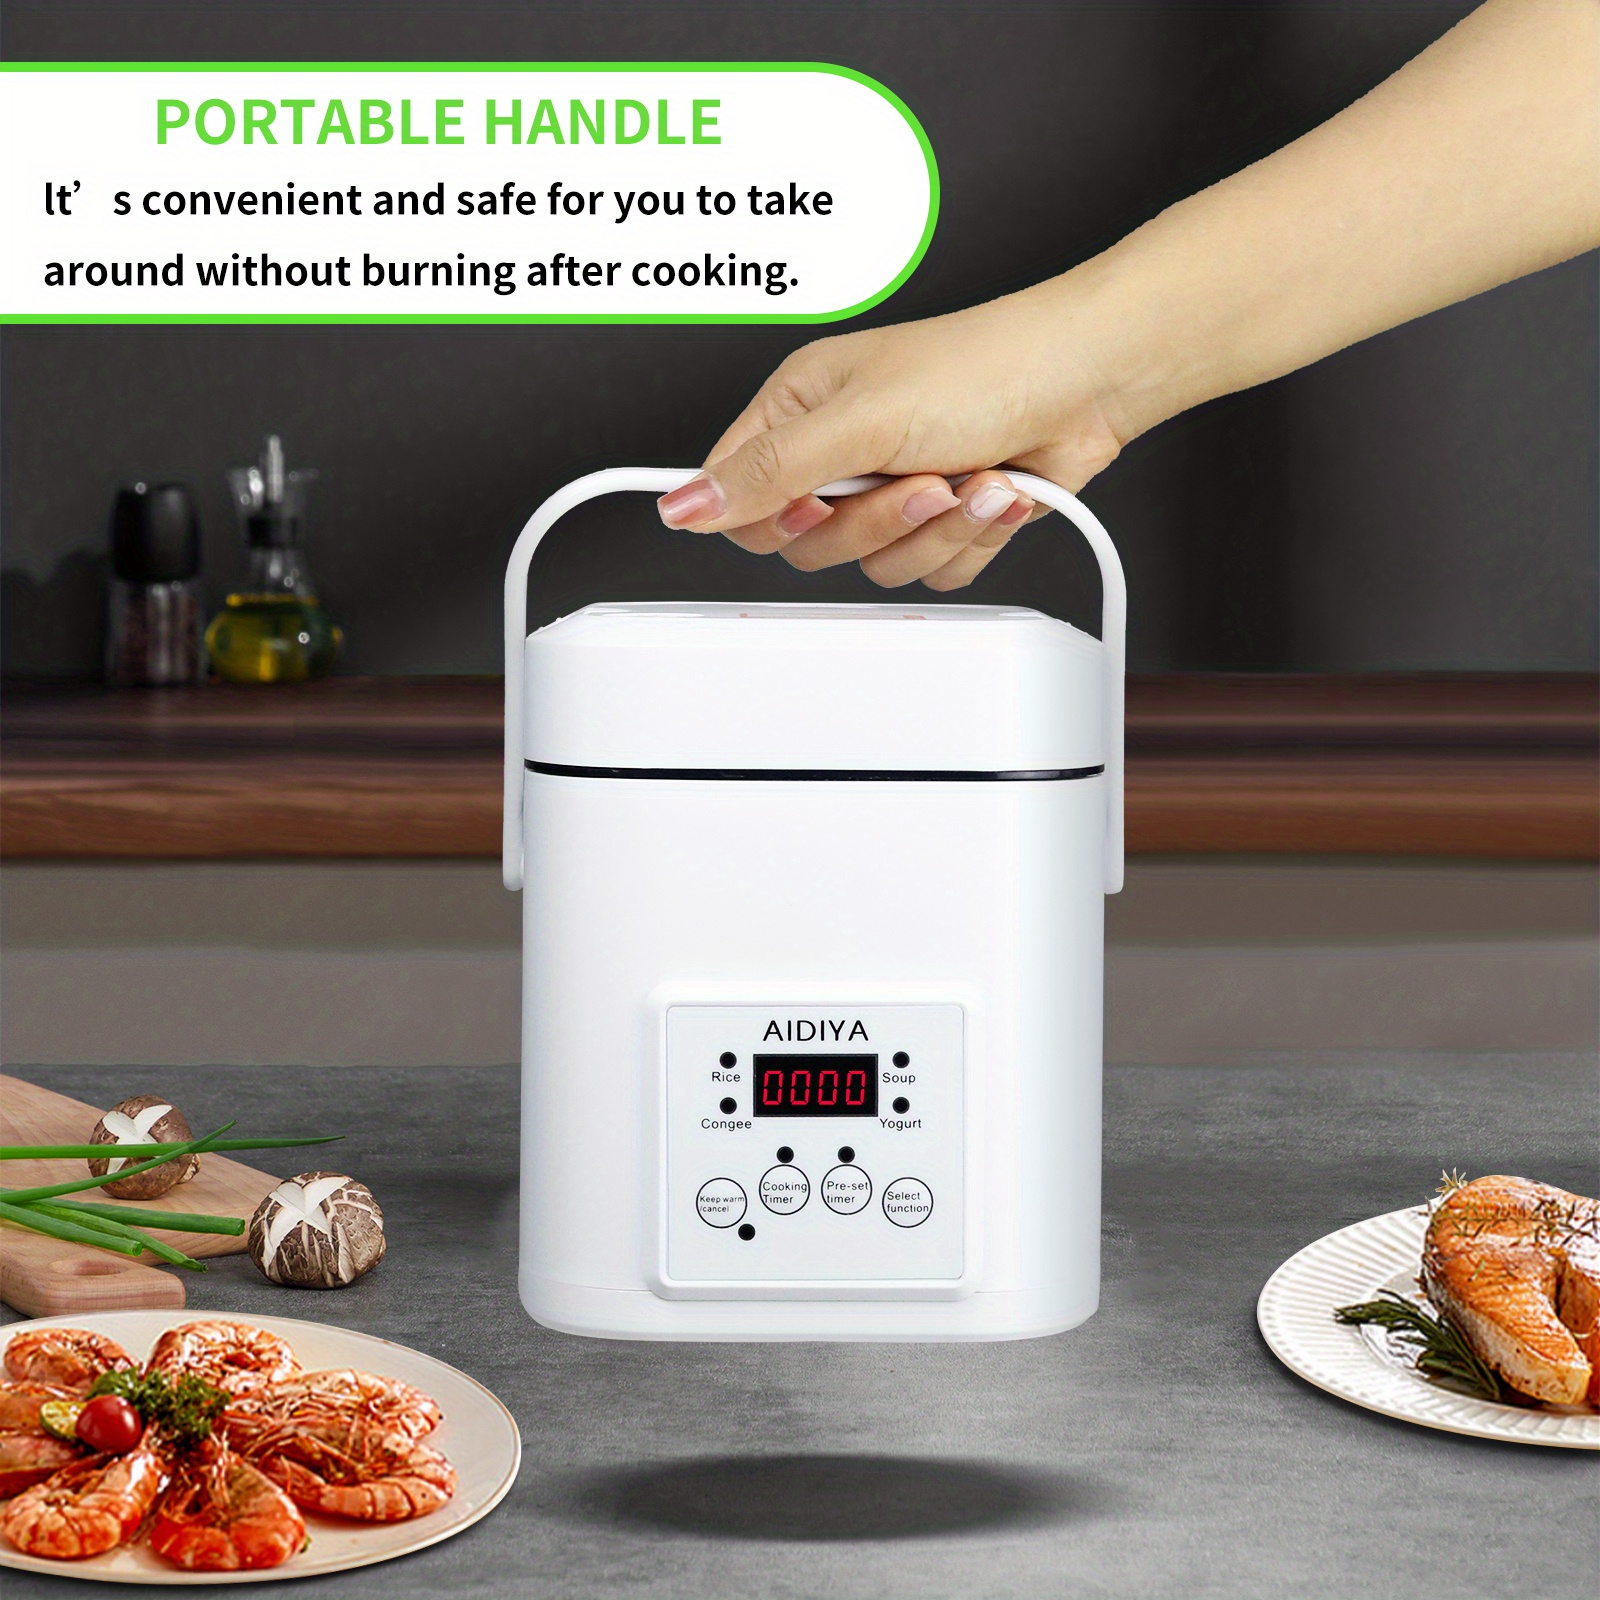 MOOSUM Electric Rice Cooker with One Touch for Asian Japanese Sushi Rice, 3-Cup Uncooked/6-cup Cooked, Fast&Convenient Cooker with Ceramic Nonstick